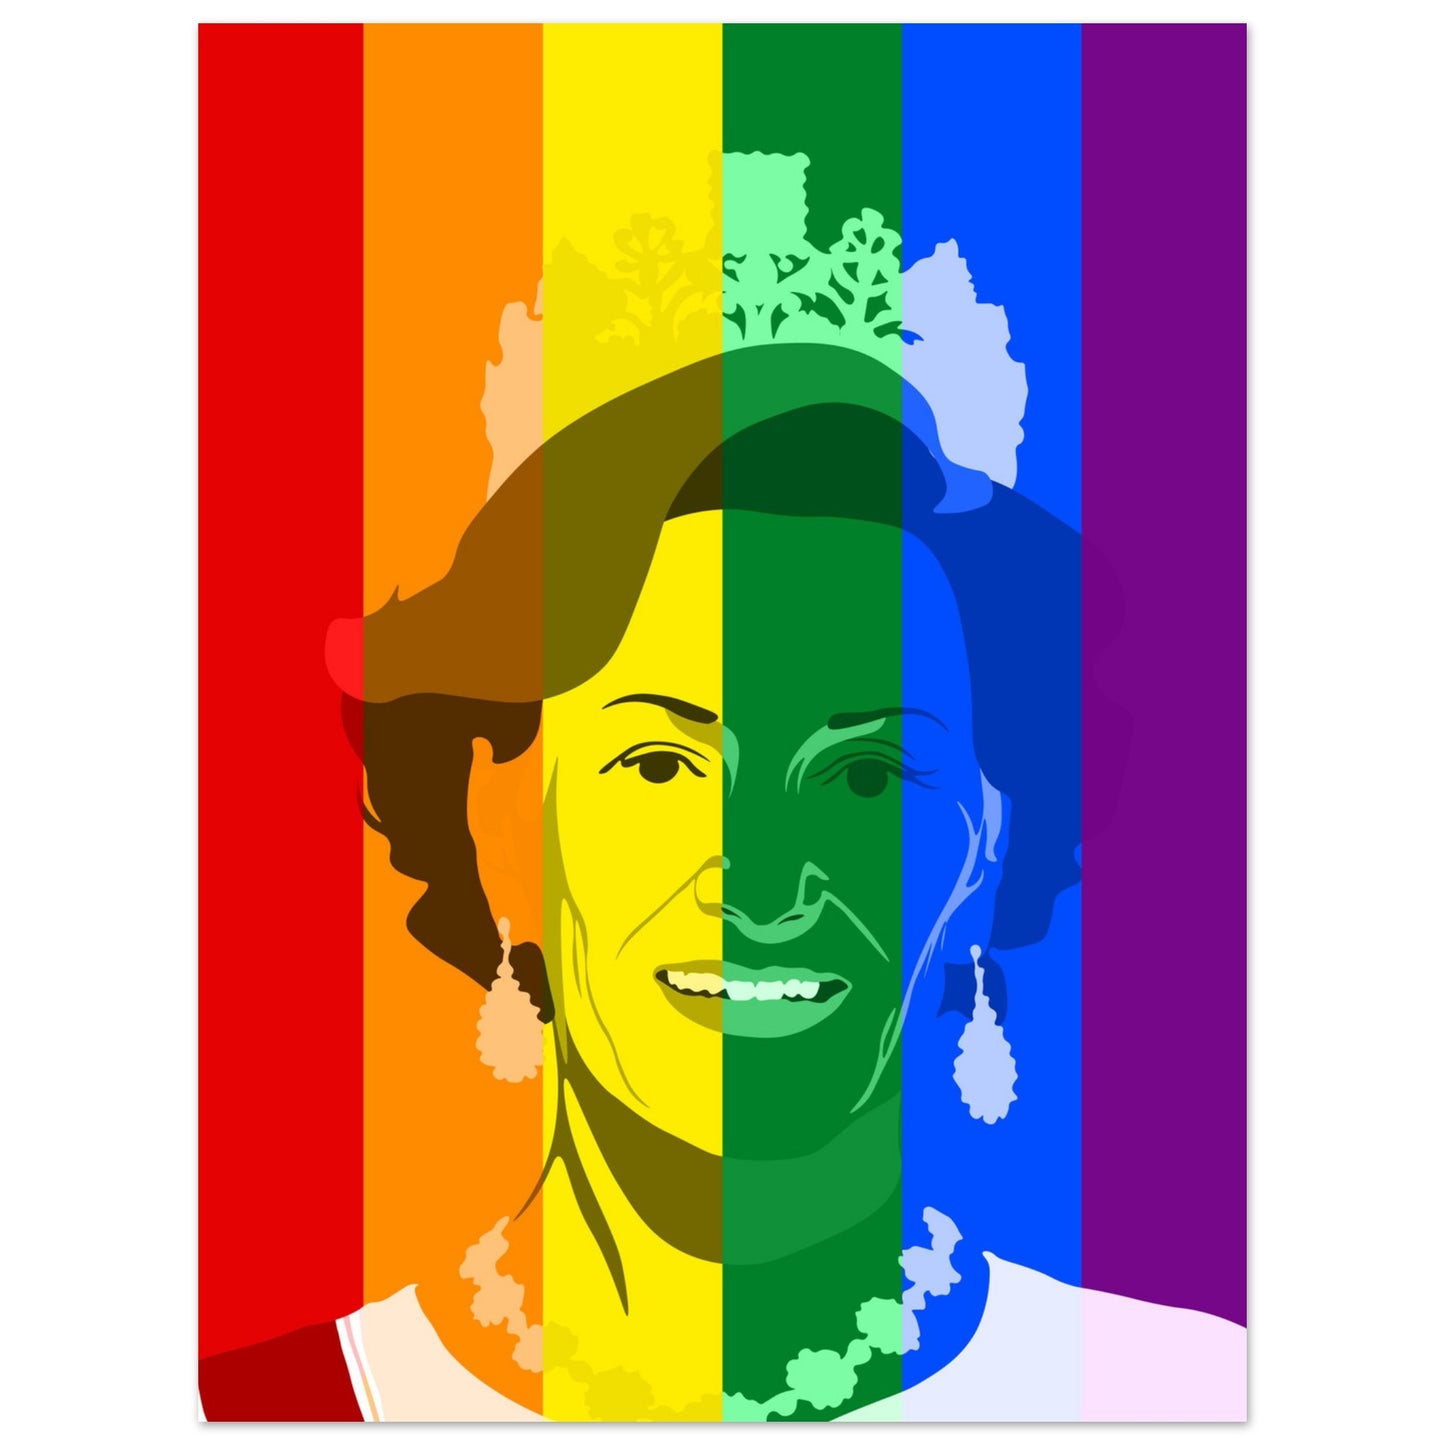 Dronning Sonja pride poster